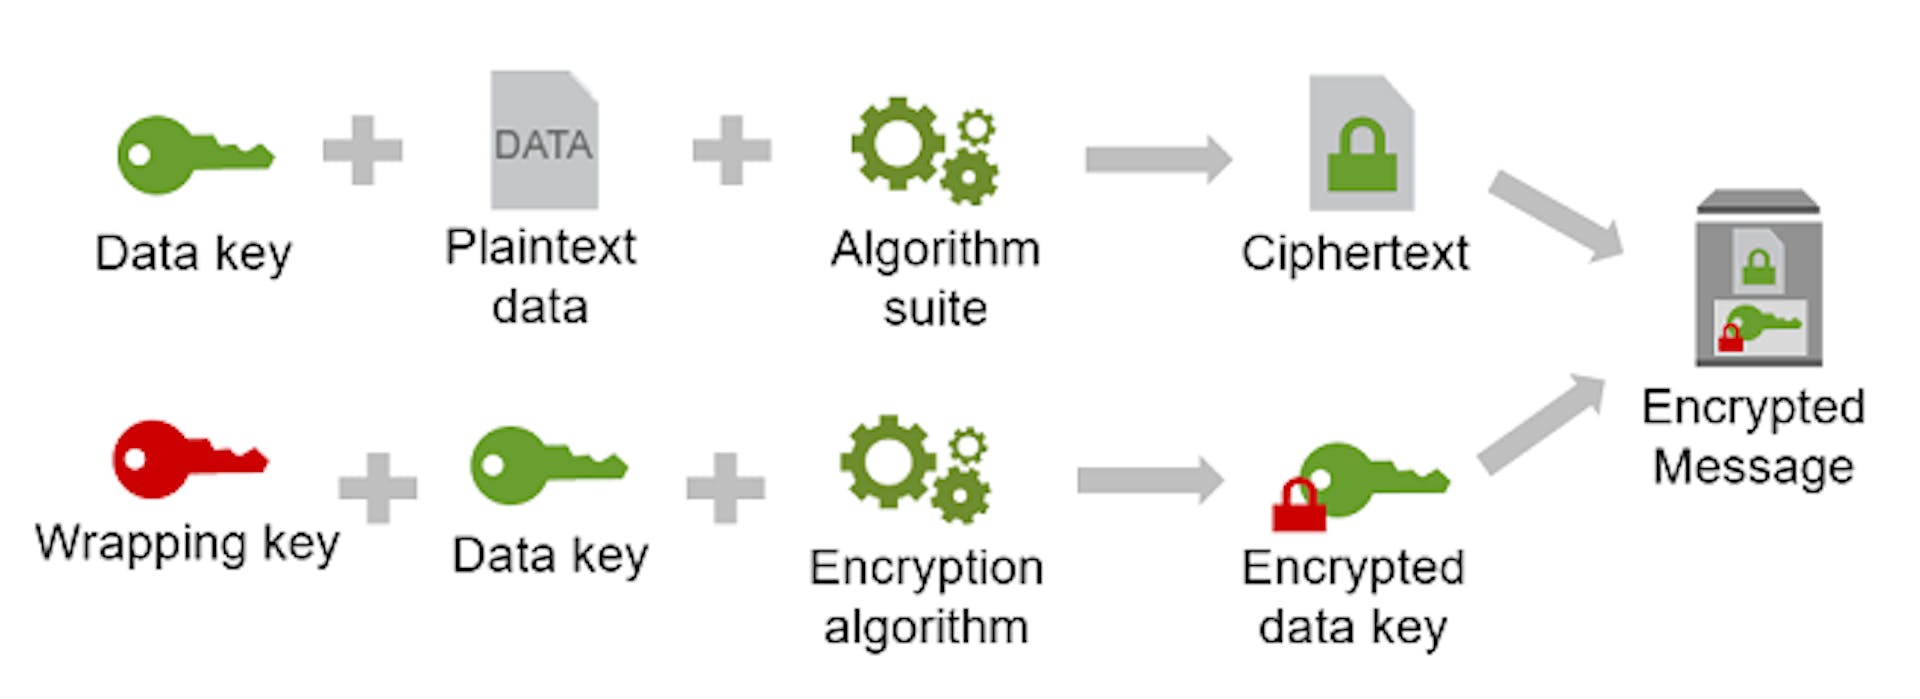 Encryption Process With Data Stored at Rest